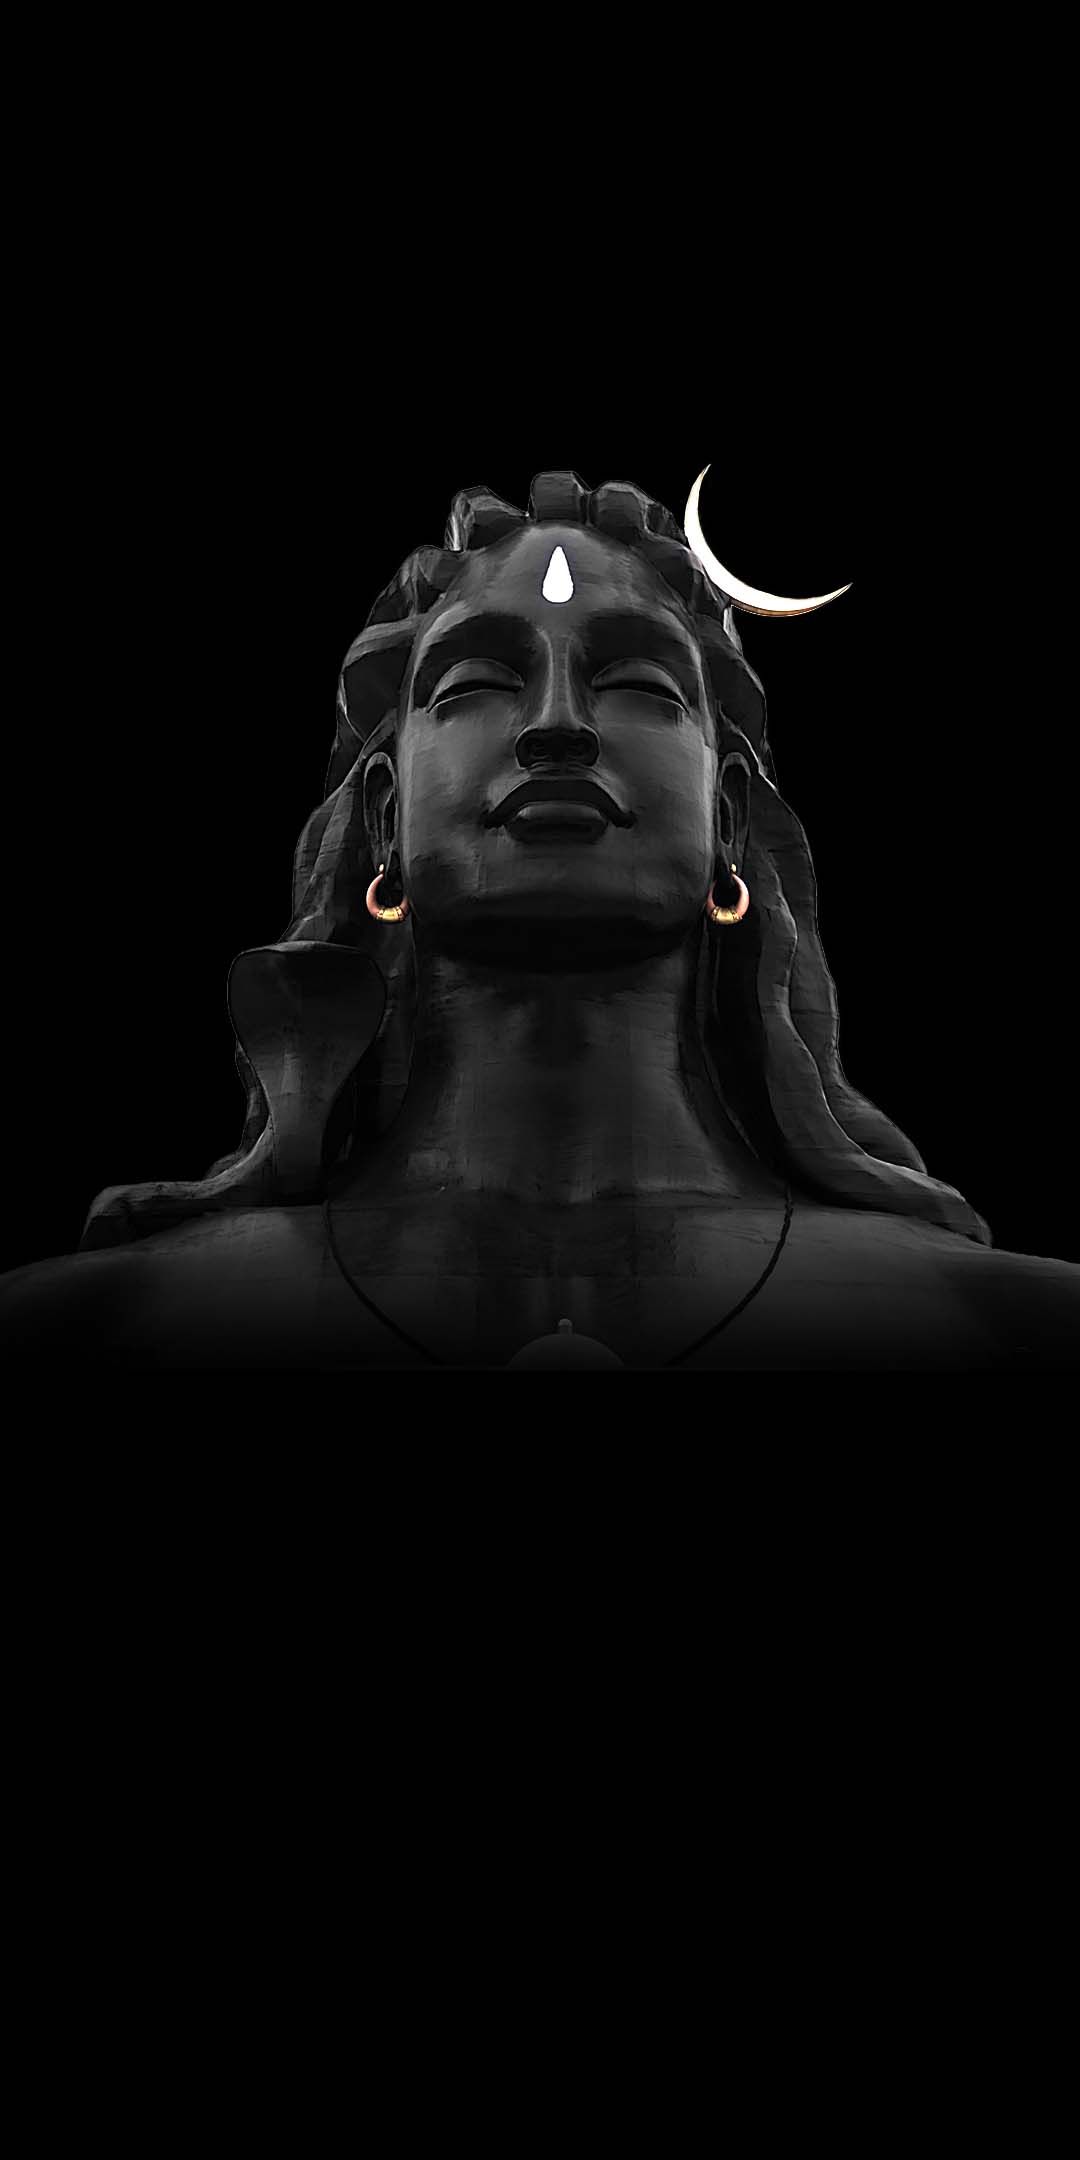 Lord Shiva 4k Ultra Hd Mobile Wallpapers Wallpaper Cave